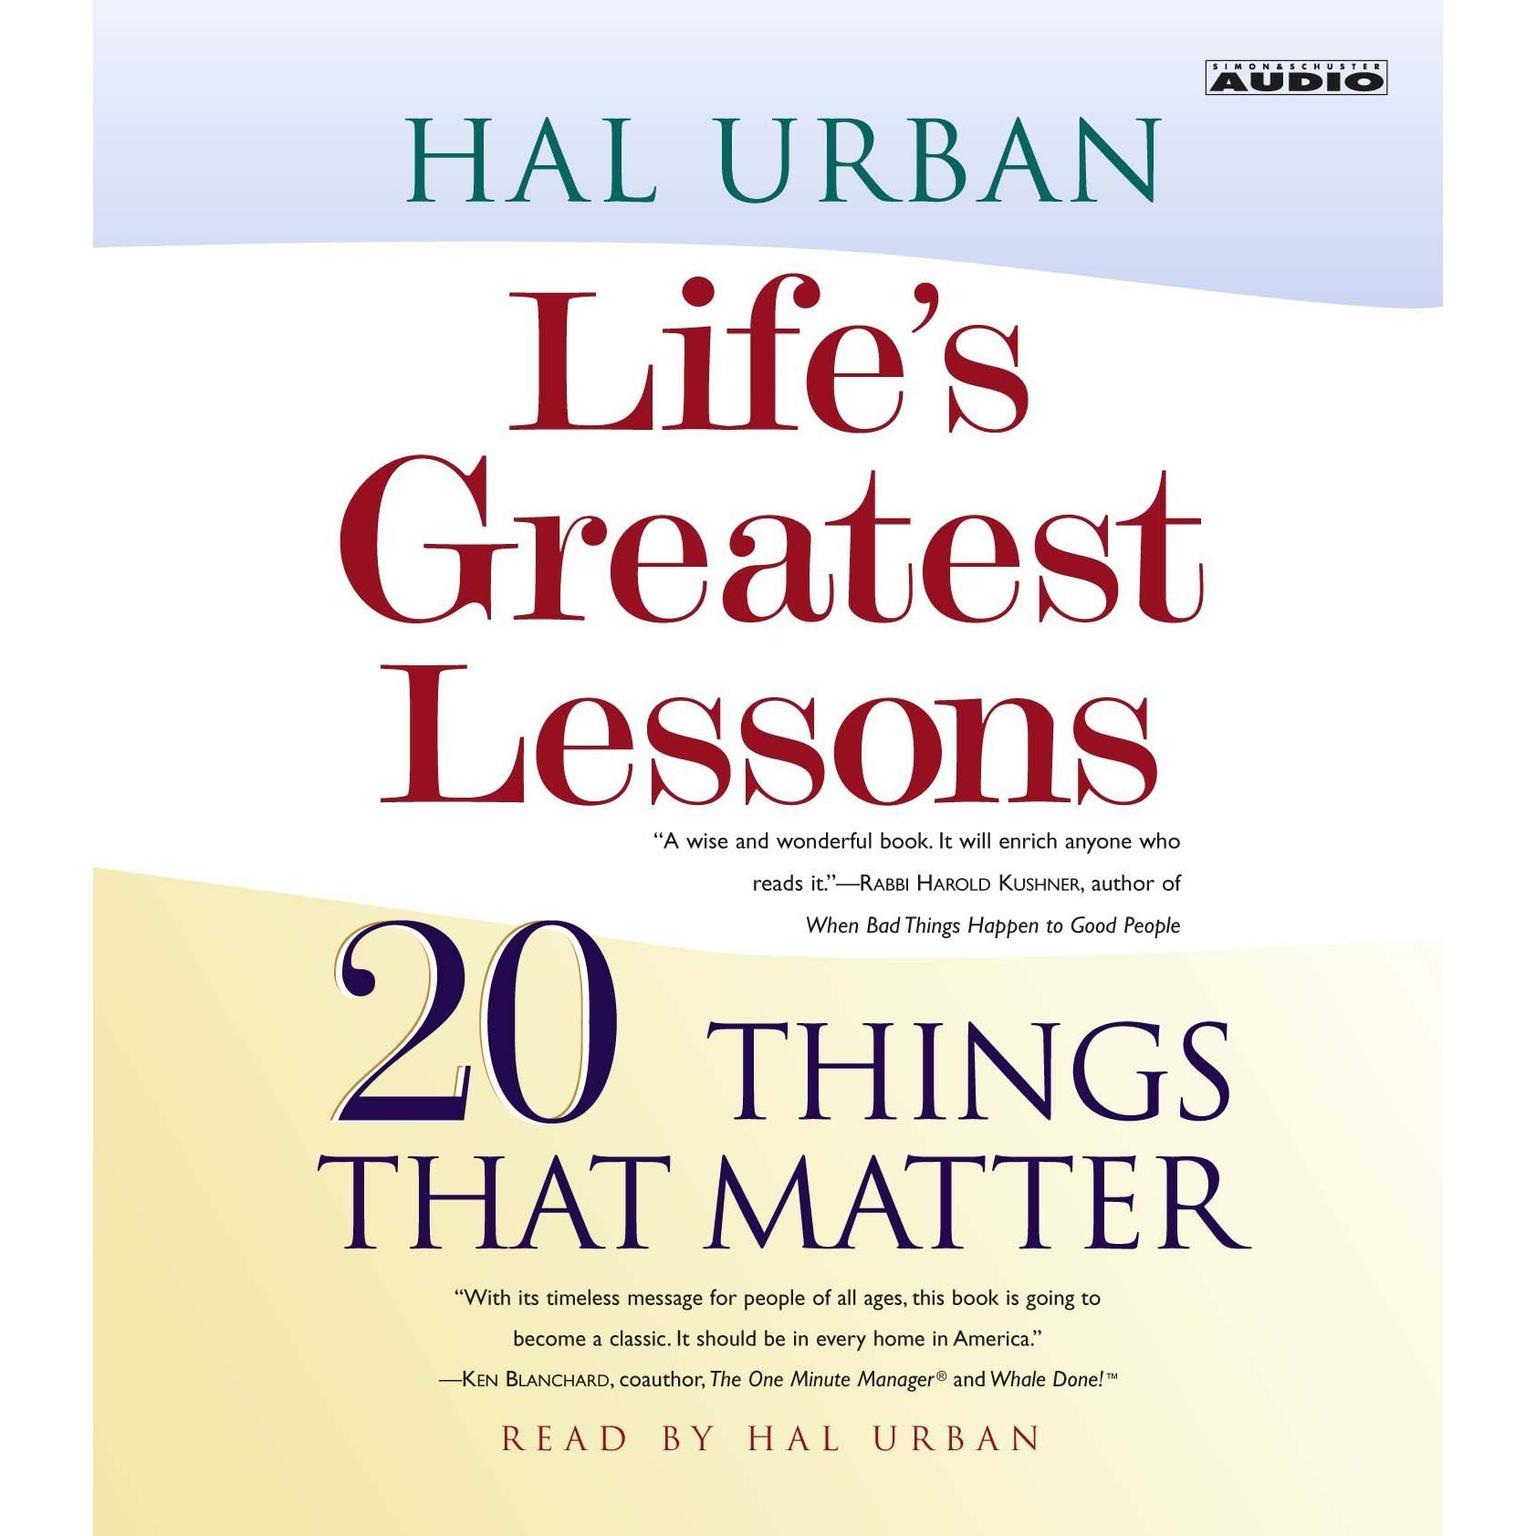 Lifes Greatest Lessons (Abridged): 20 Things That Matter Audiobook, by Hal Urban